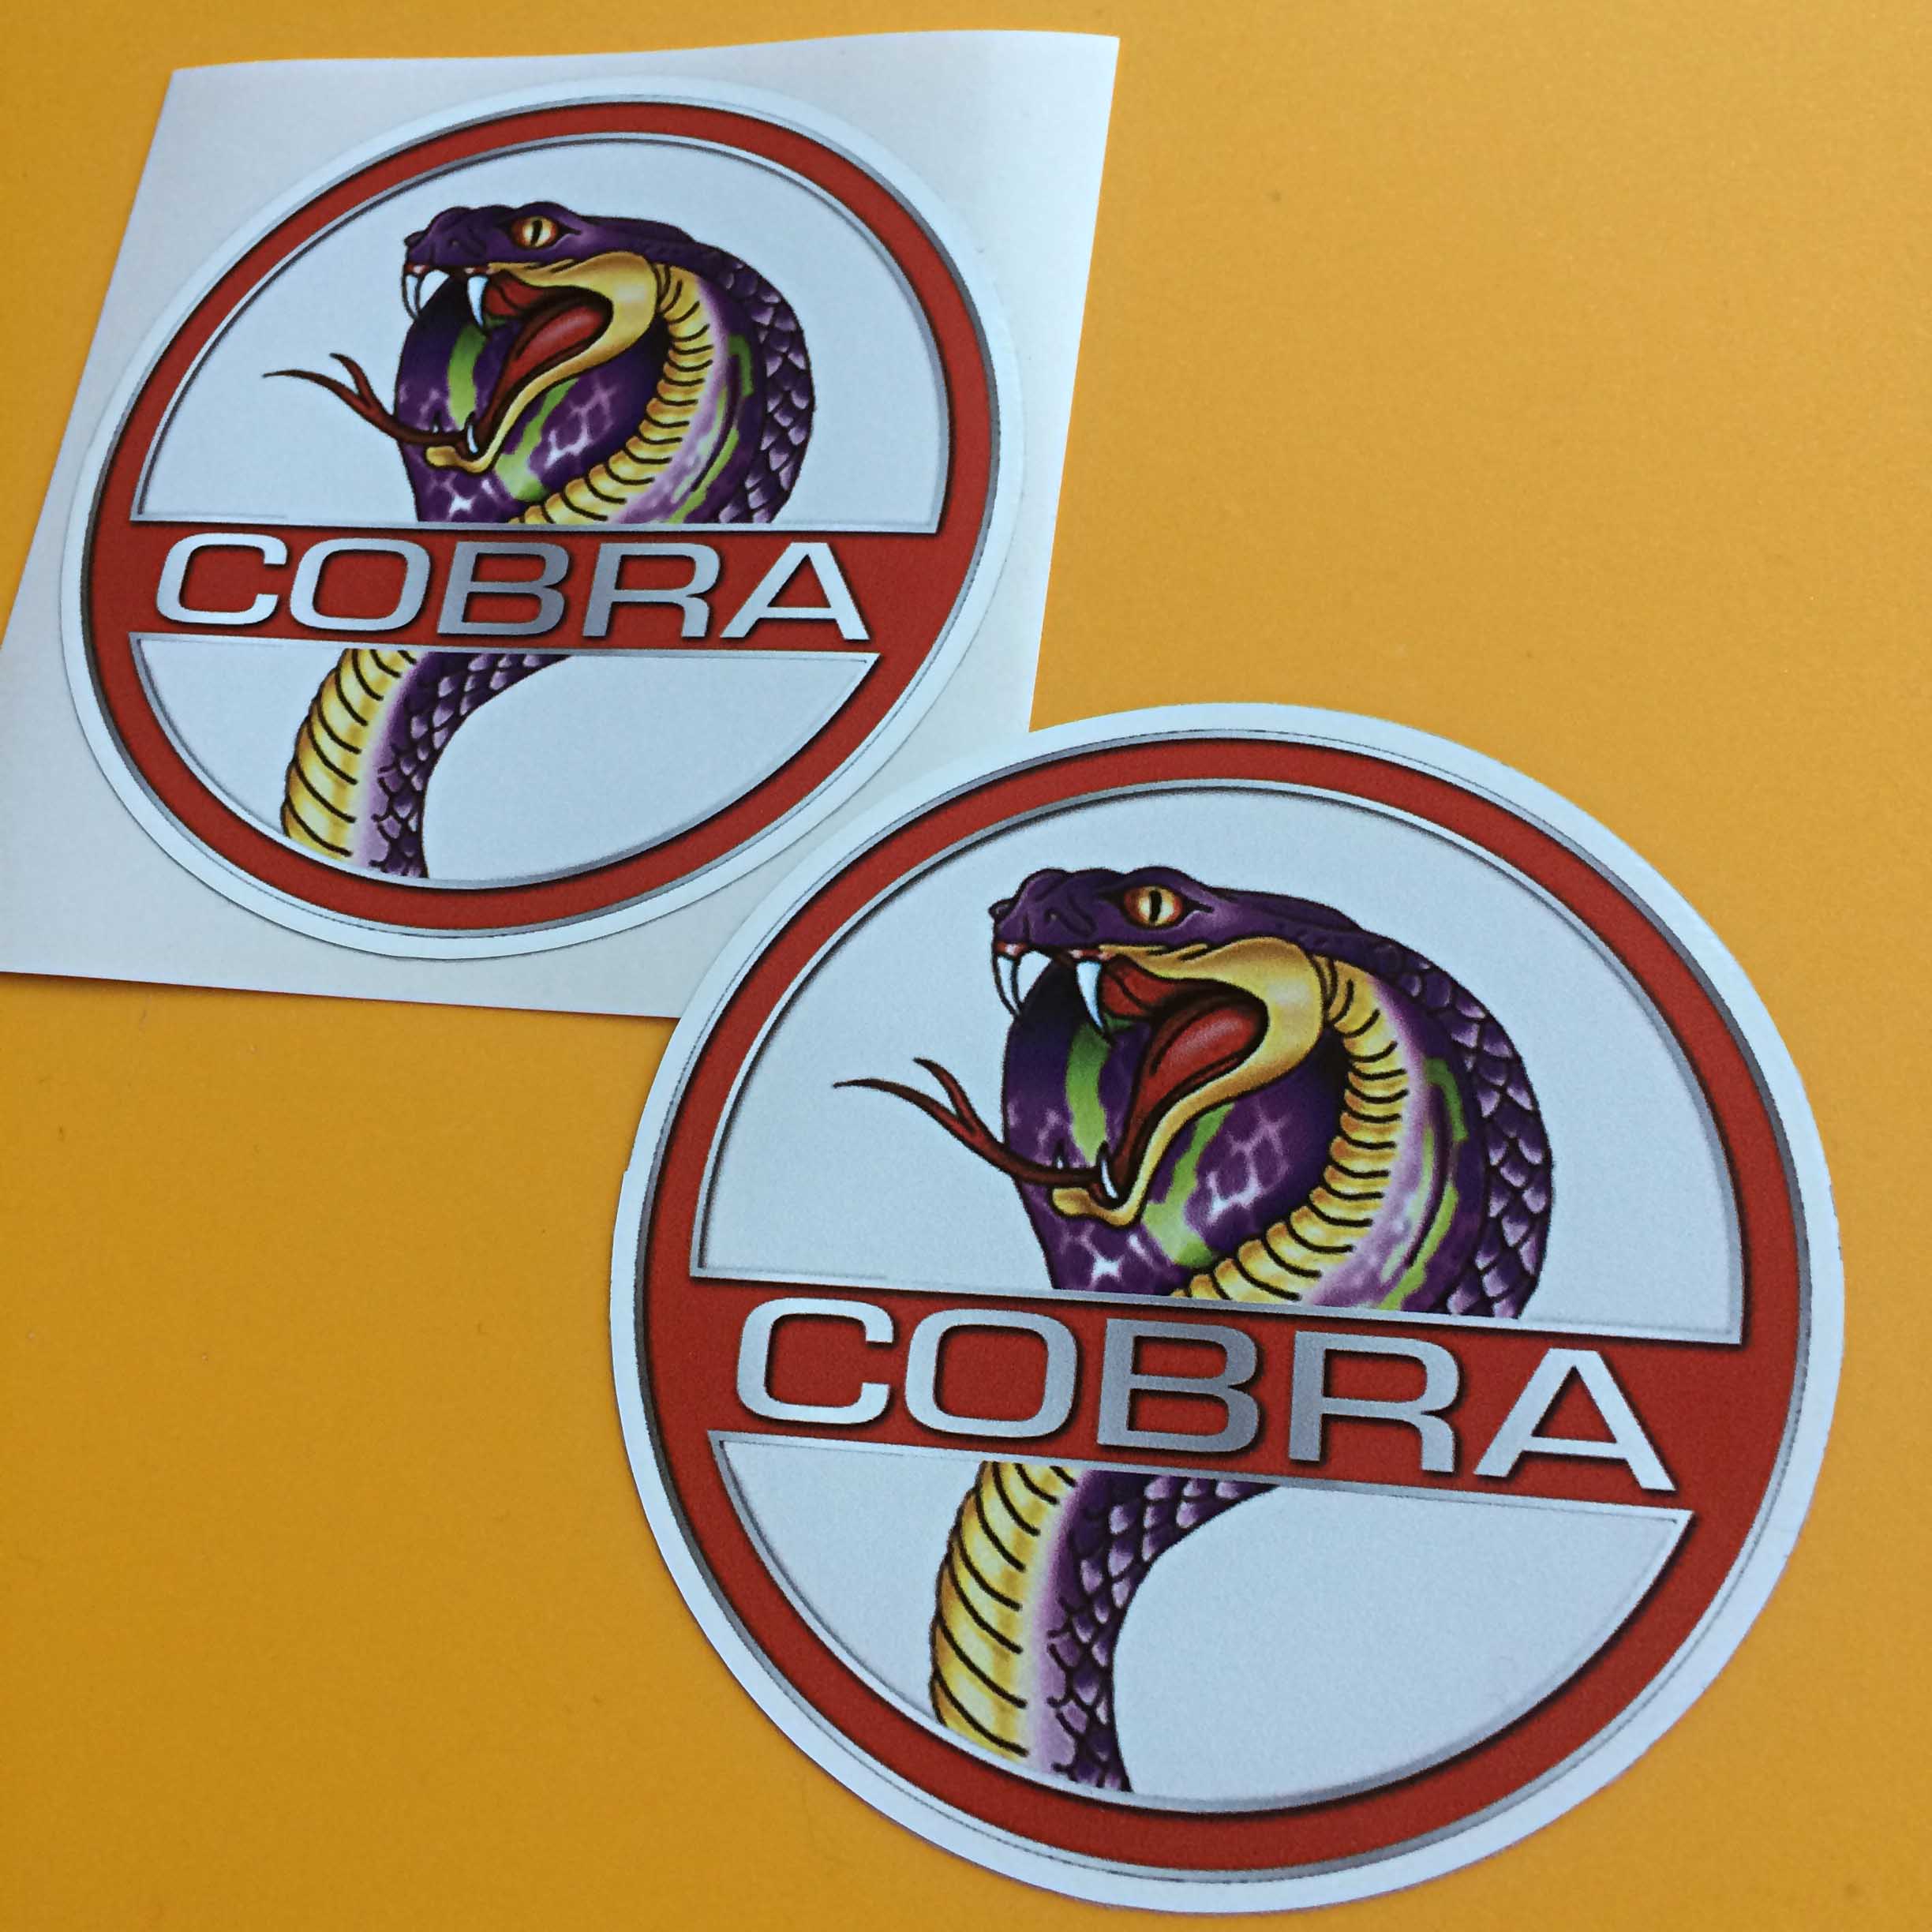 A white circular sticker with a red border. Across the centre on a red banner is Cobra in white uppercase lettering. In the background is the head of a Cobra in purple, yellow and green displaying a red tongue and white fangs.